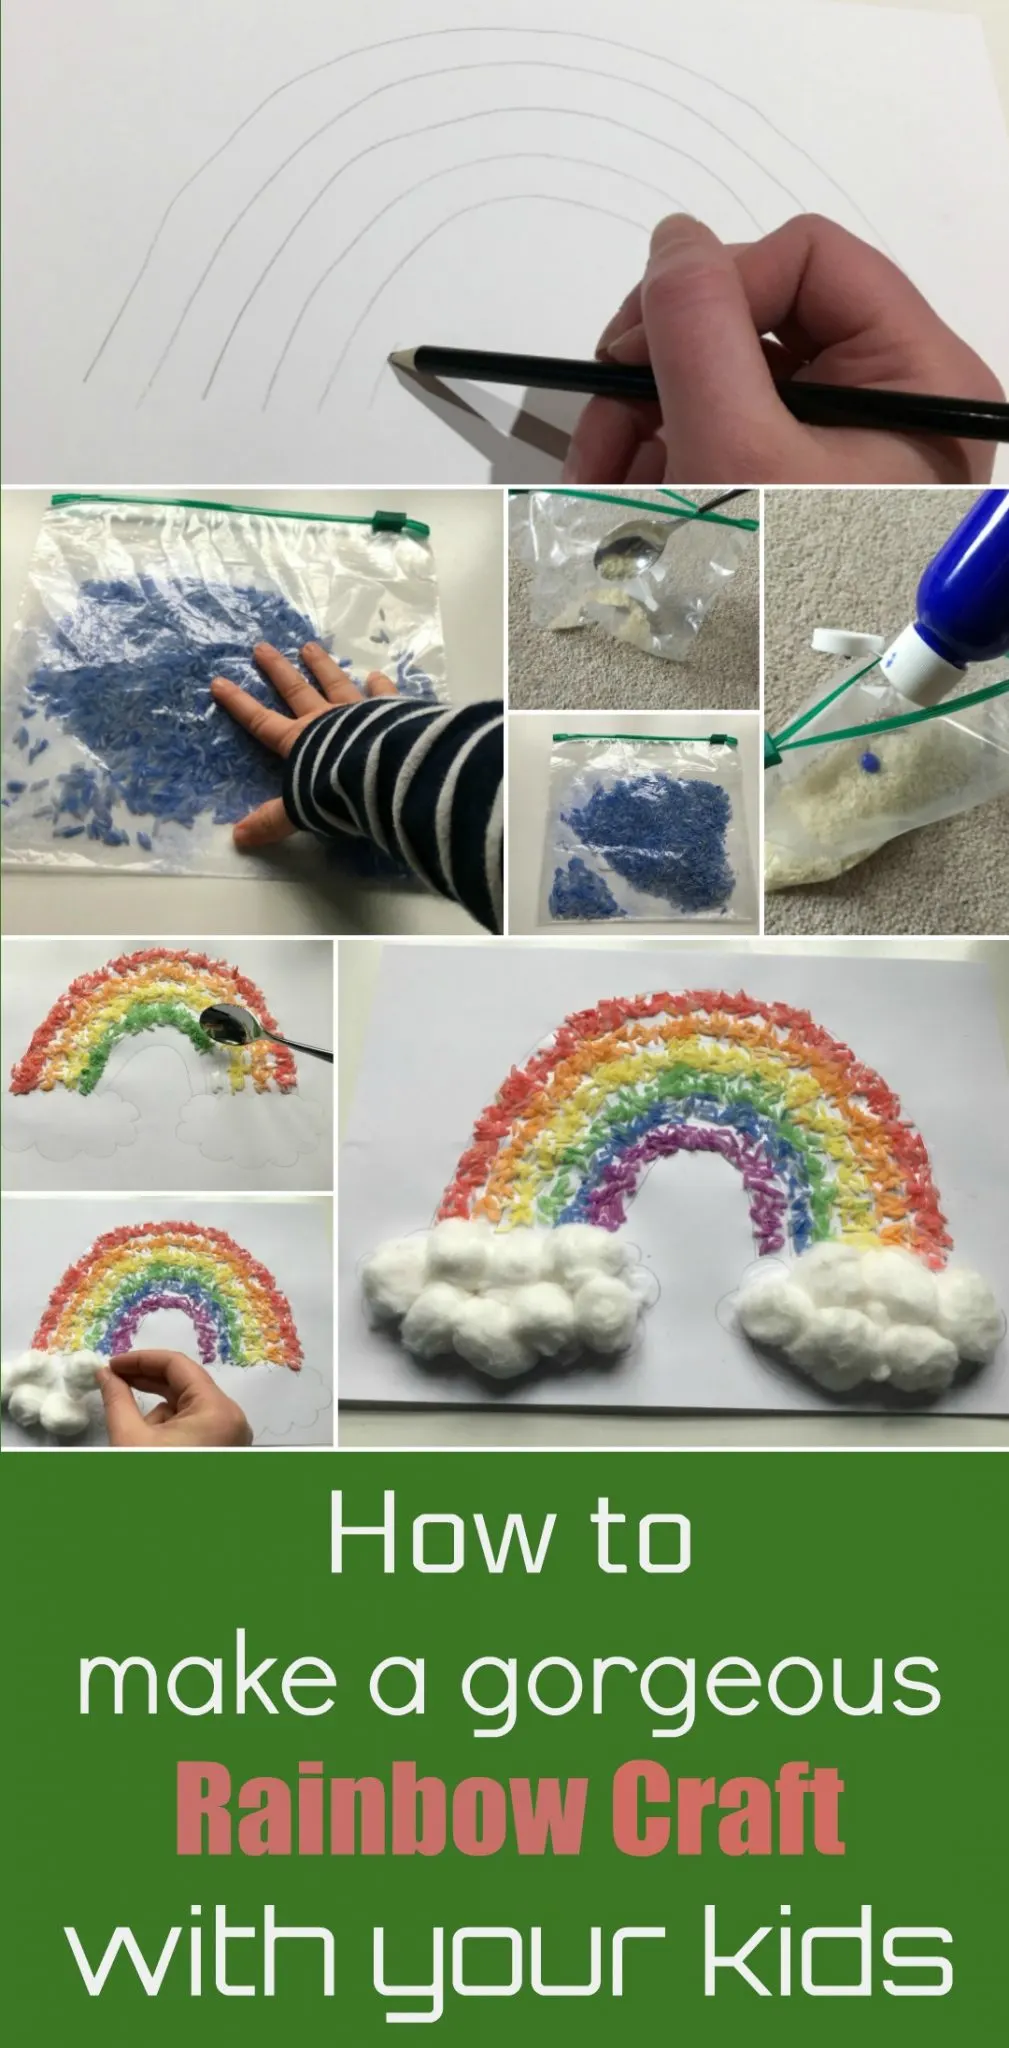 This rainbow craft is lovely to do with the kids - something special for a rainy day, when perhaps there is a rainbow outside - or just any day!